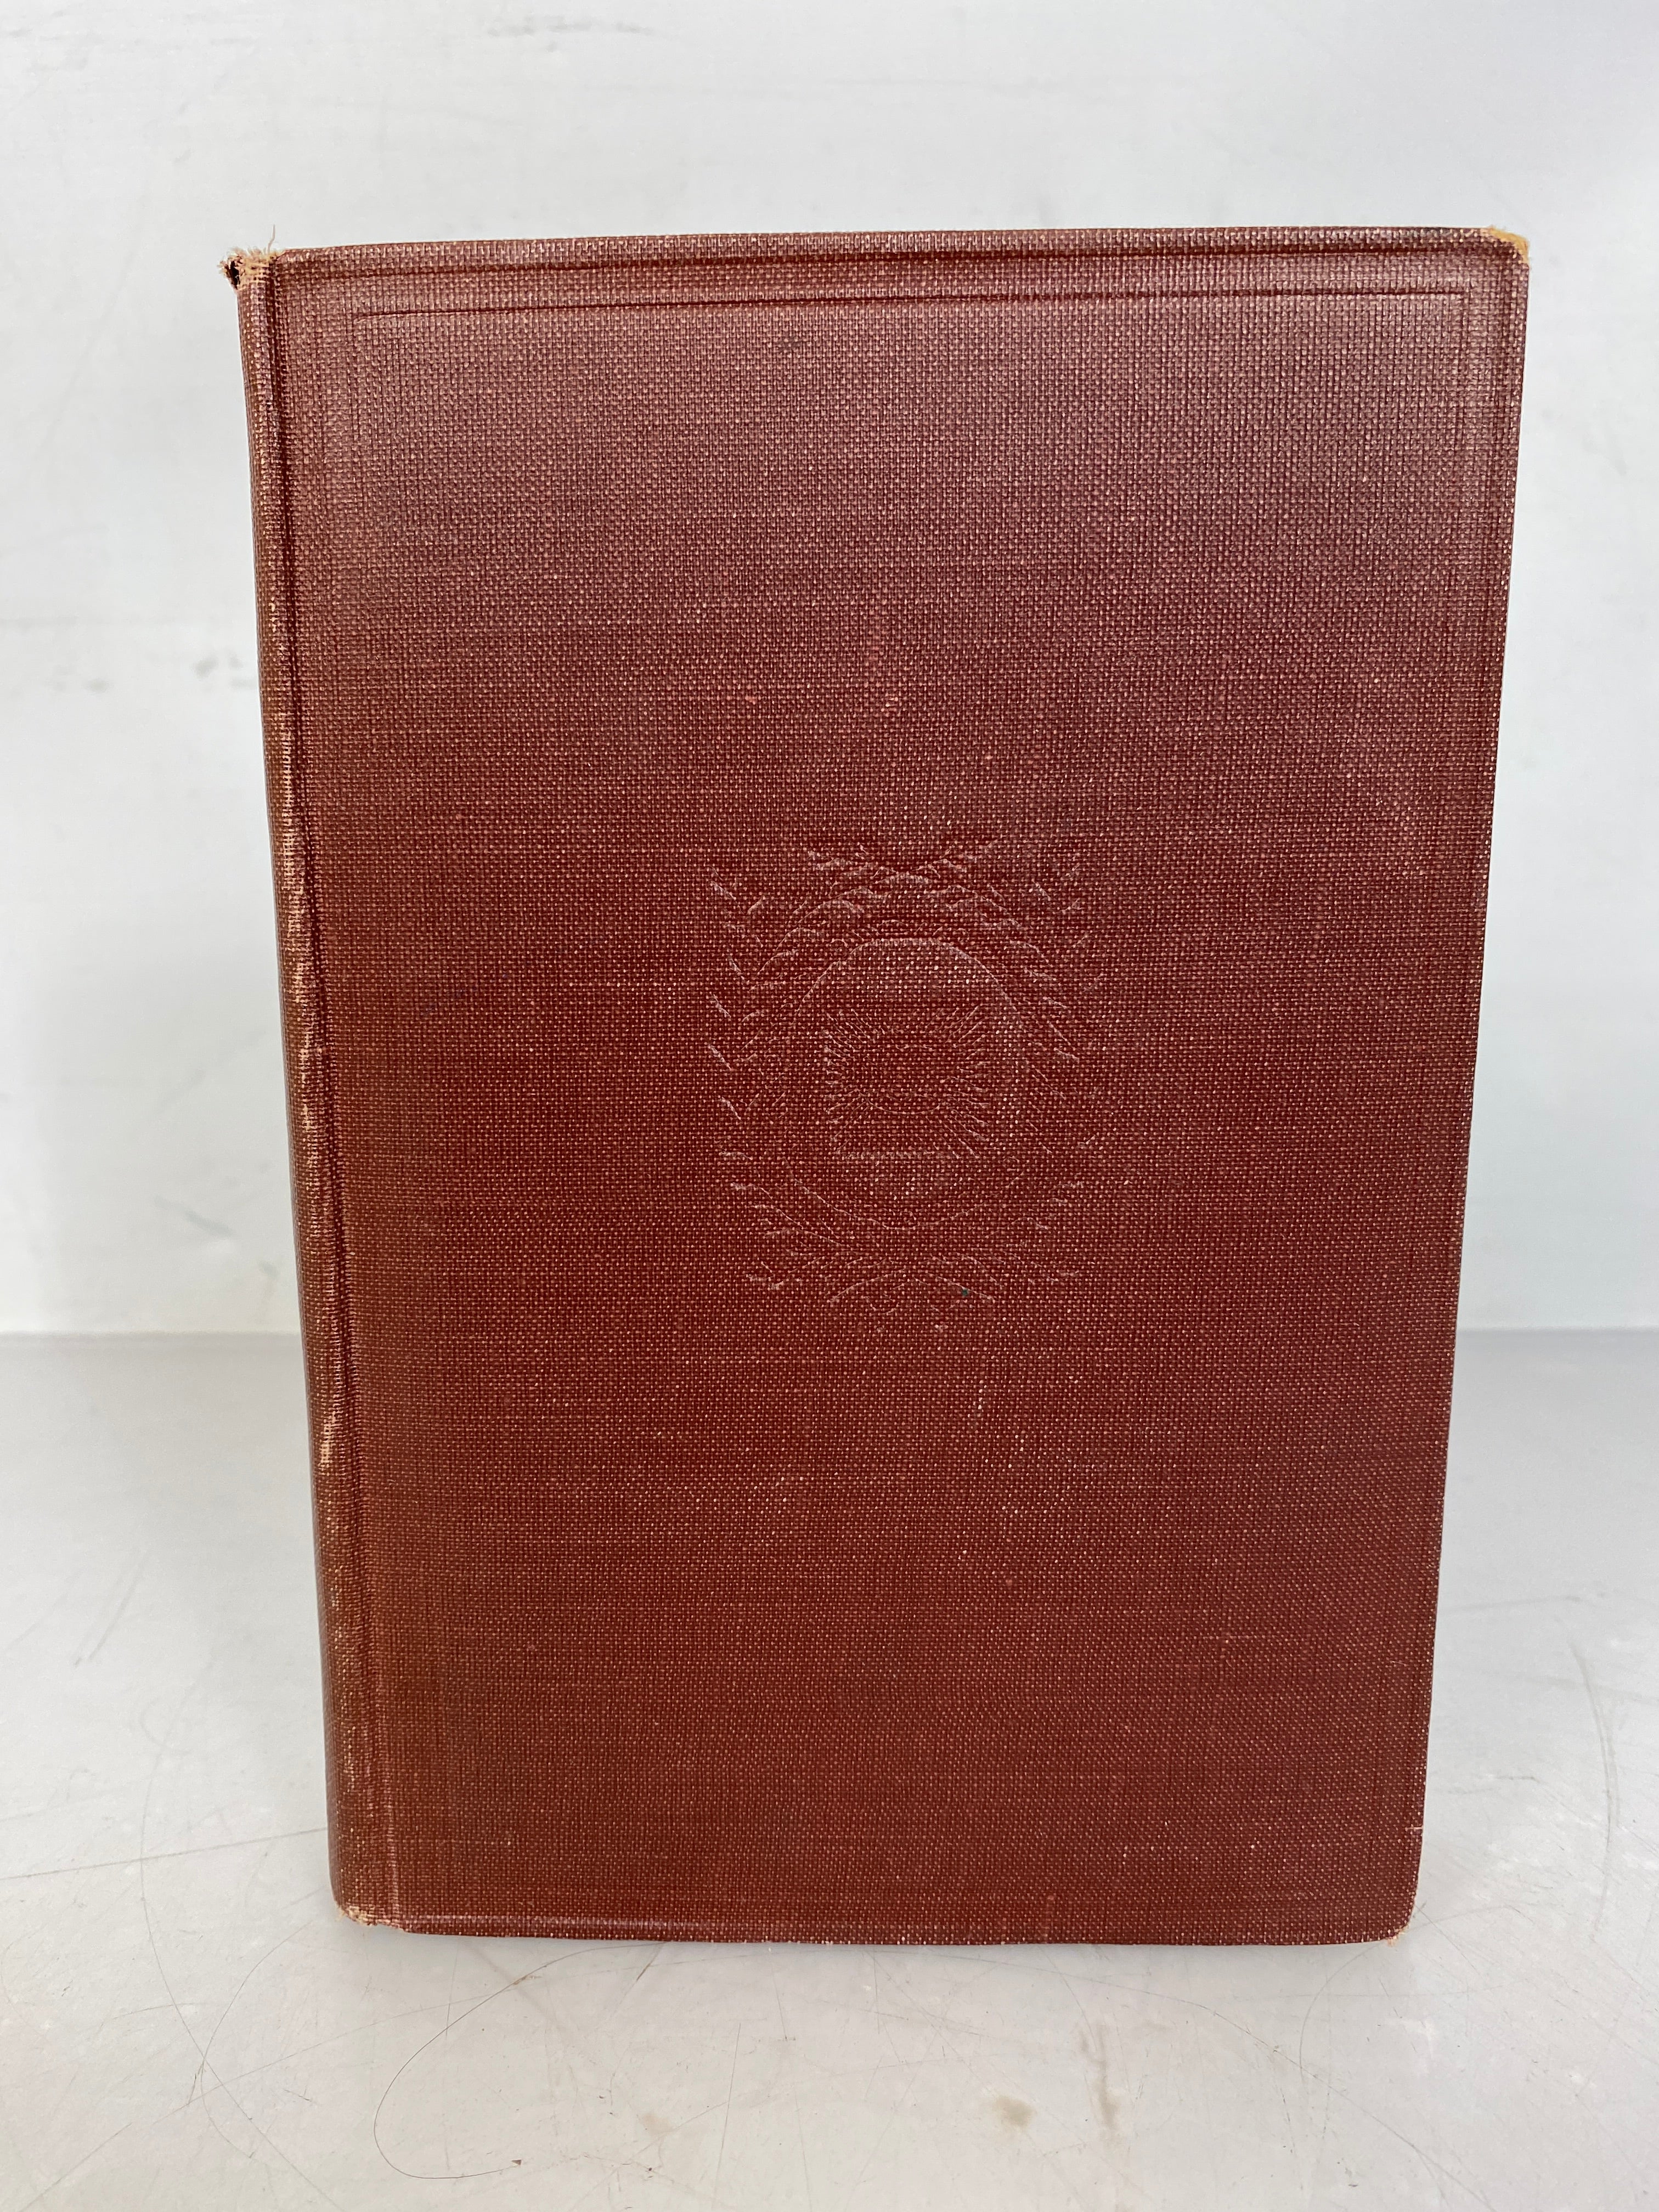 Primer of Psychotherapy Outwitting Our Nerves by Jackson and Salisbury 1922 HC